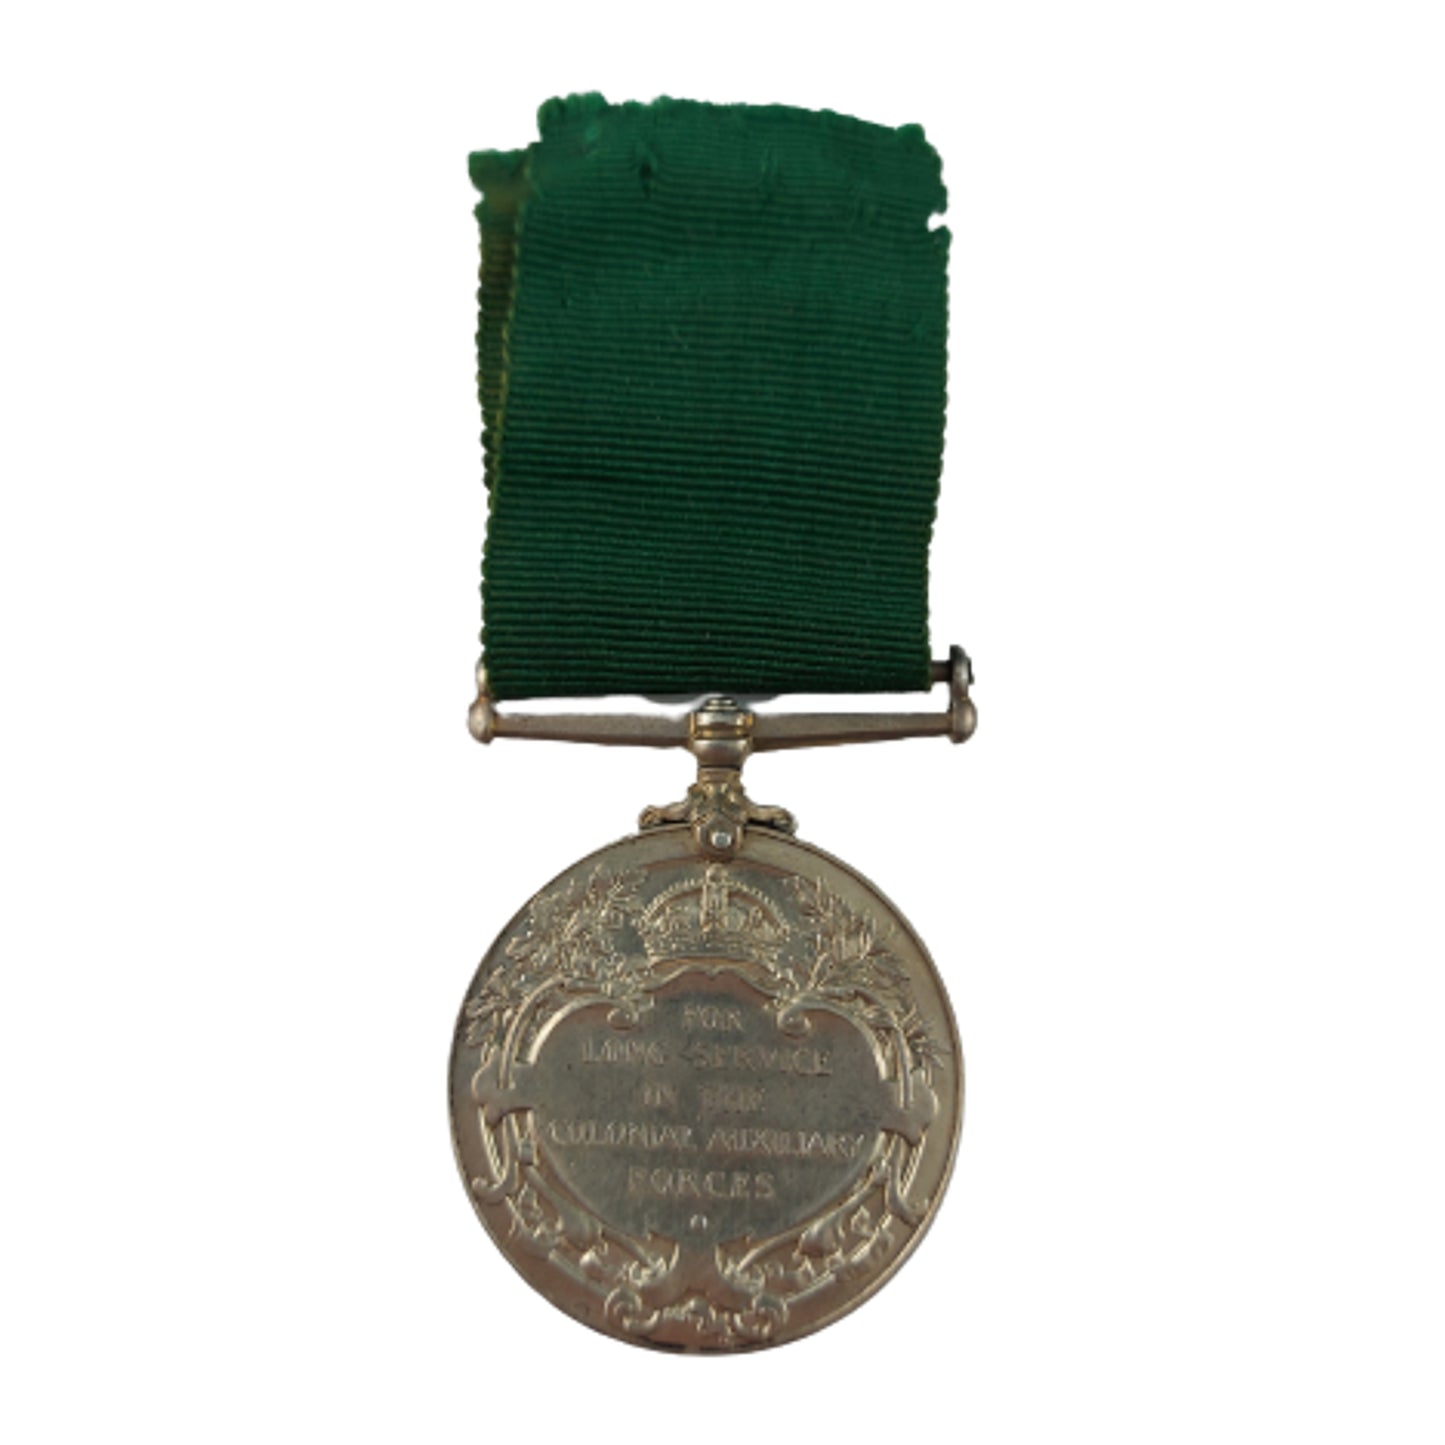 Pre-WW1 Canadian Colonial Auxiliary Forces Long Service Medal 43rd Regiment "The Duke of Cornwall's Own Rifles"